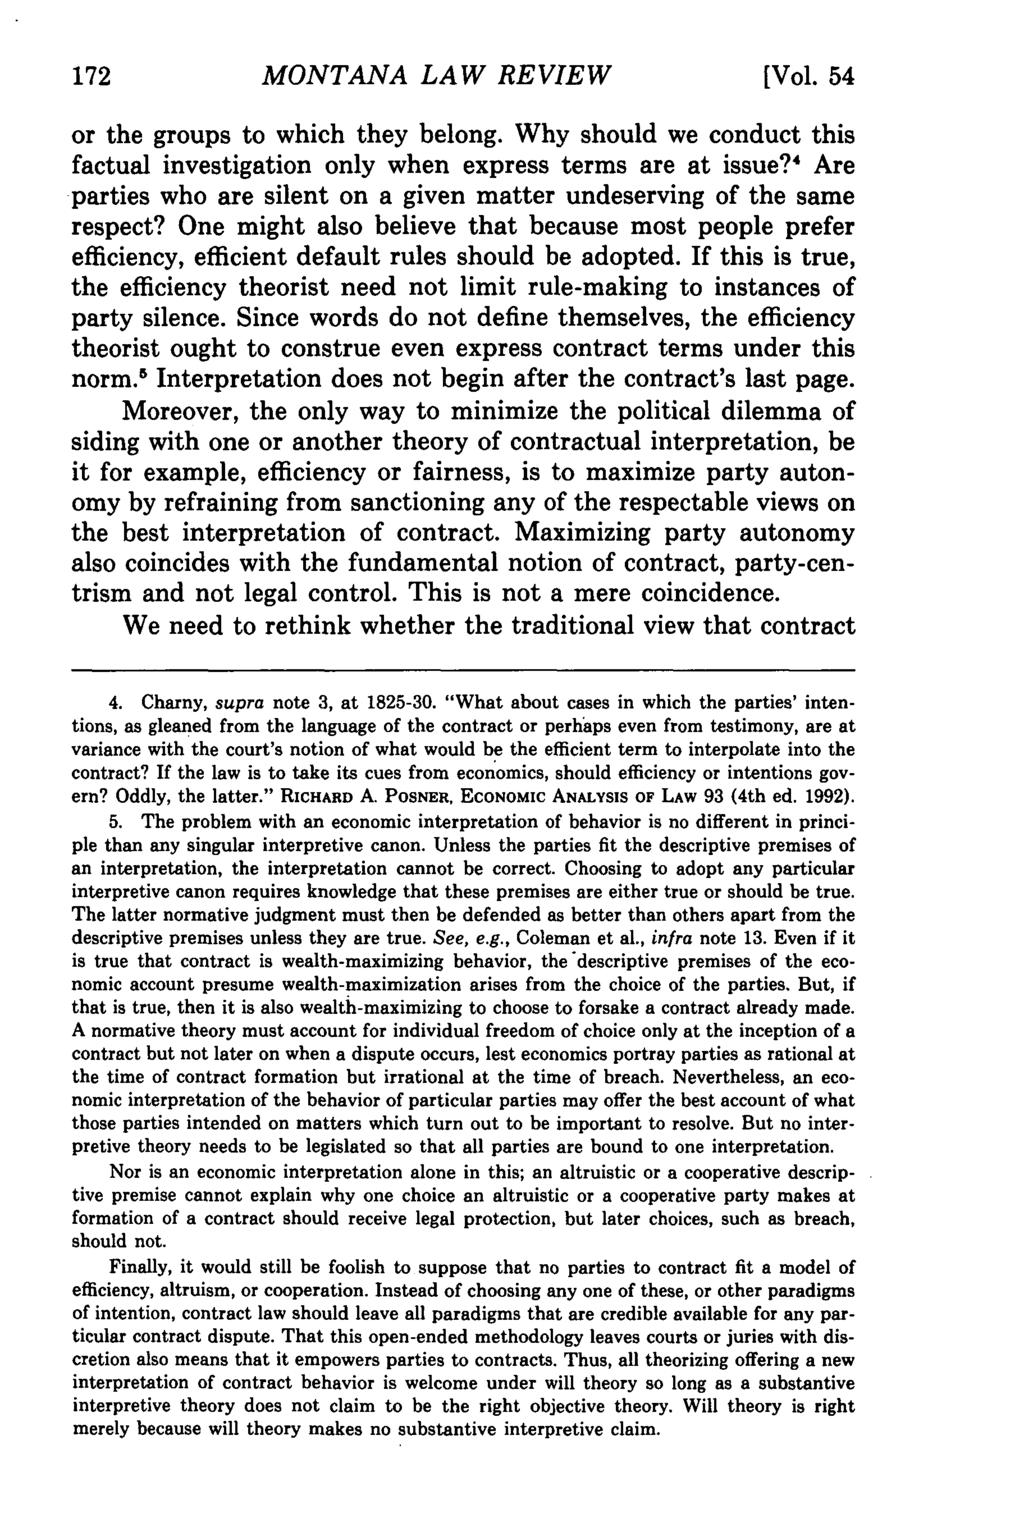 Montana Law Review, Vol. 54 [1993], Iss. 2, Art. 1 MONTANA LAW REVIEW [Vol. 54 or the groups to which they belong.